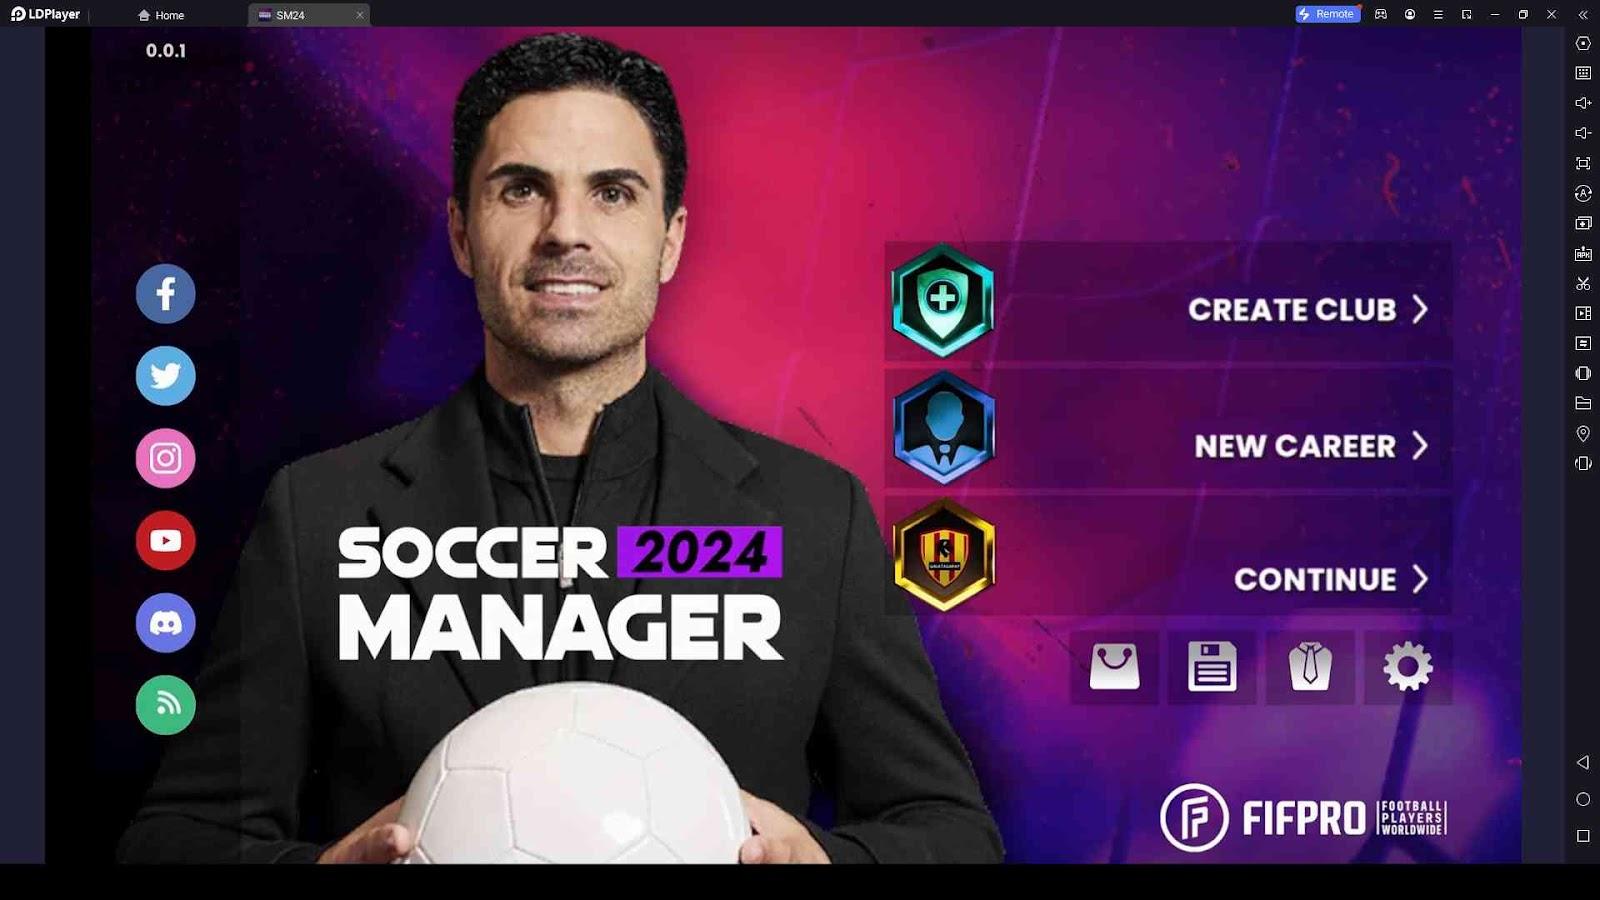 Ultimate Guide and Tips for Soccer Manager 2024 Newbie PlayersGame